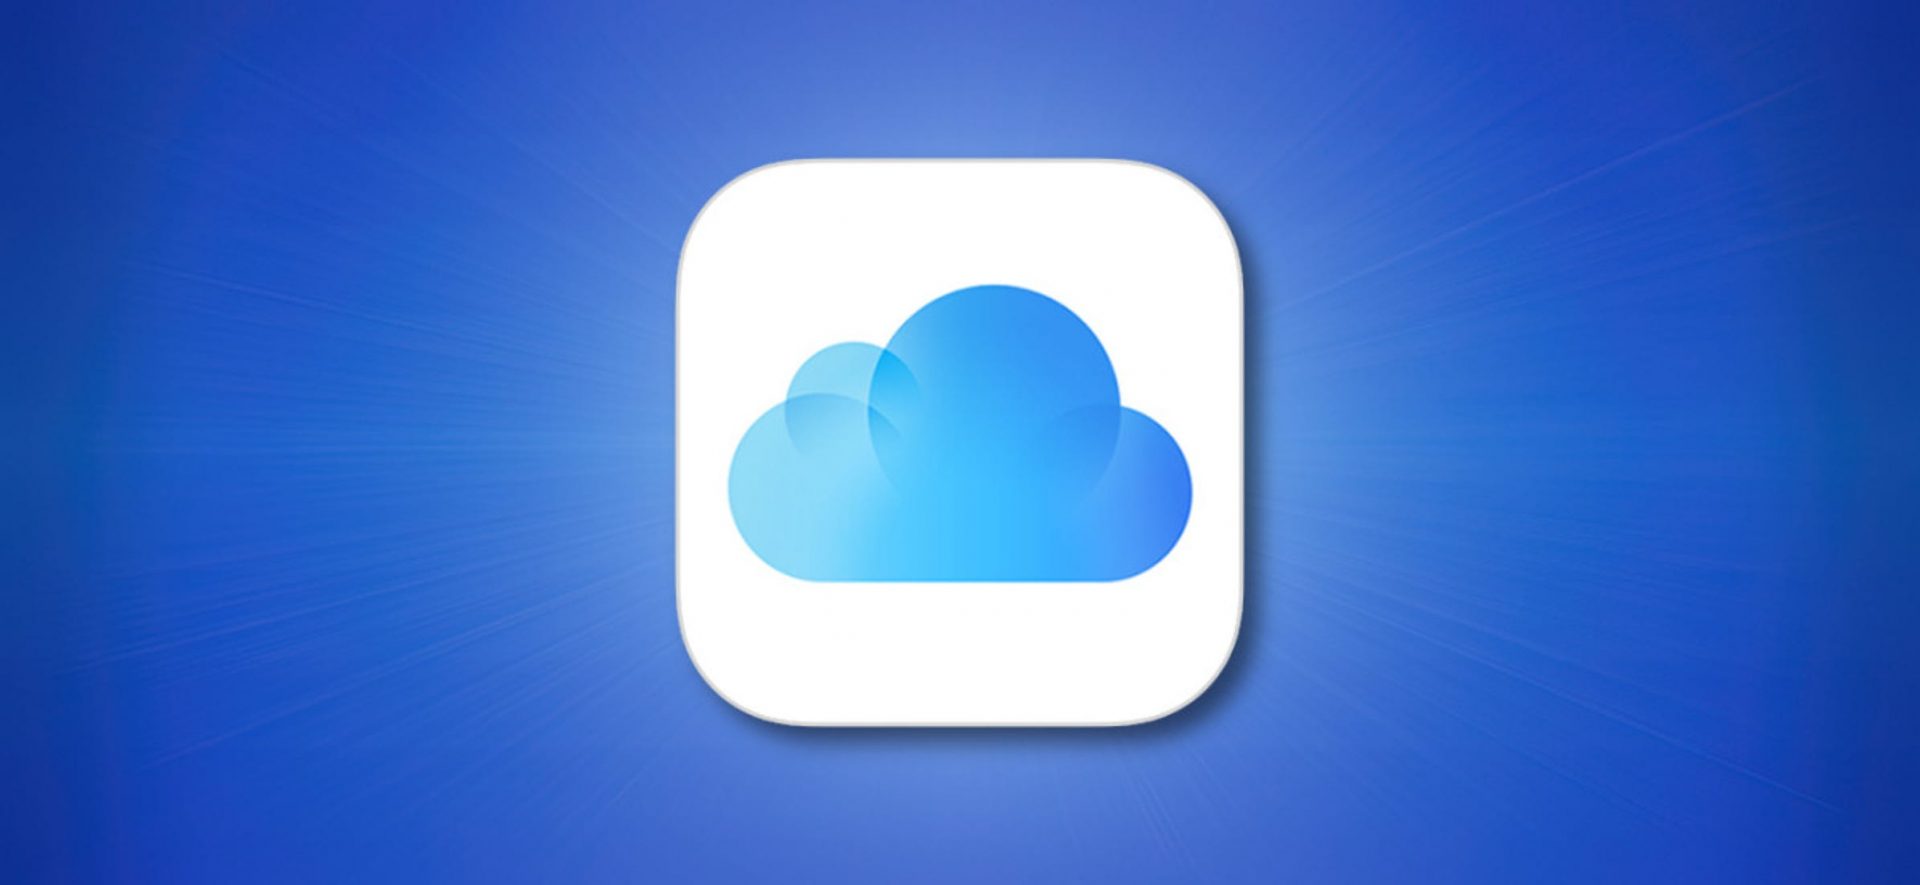 Easy ideas to Execute Your Apple iCloud Storage Subscription